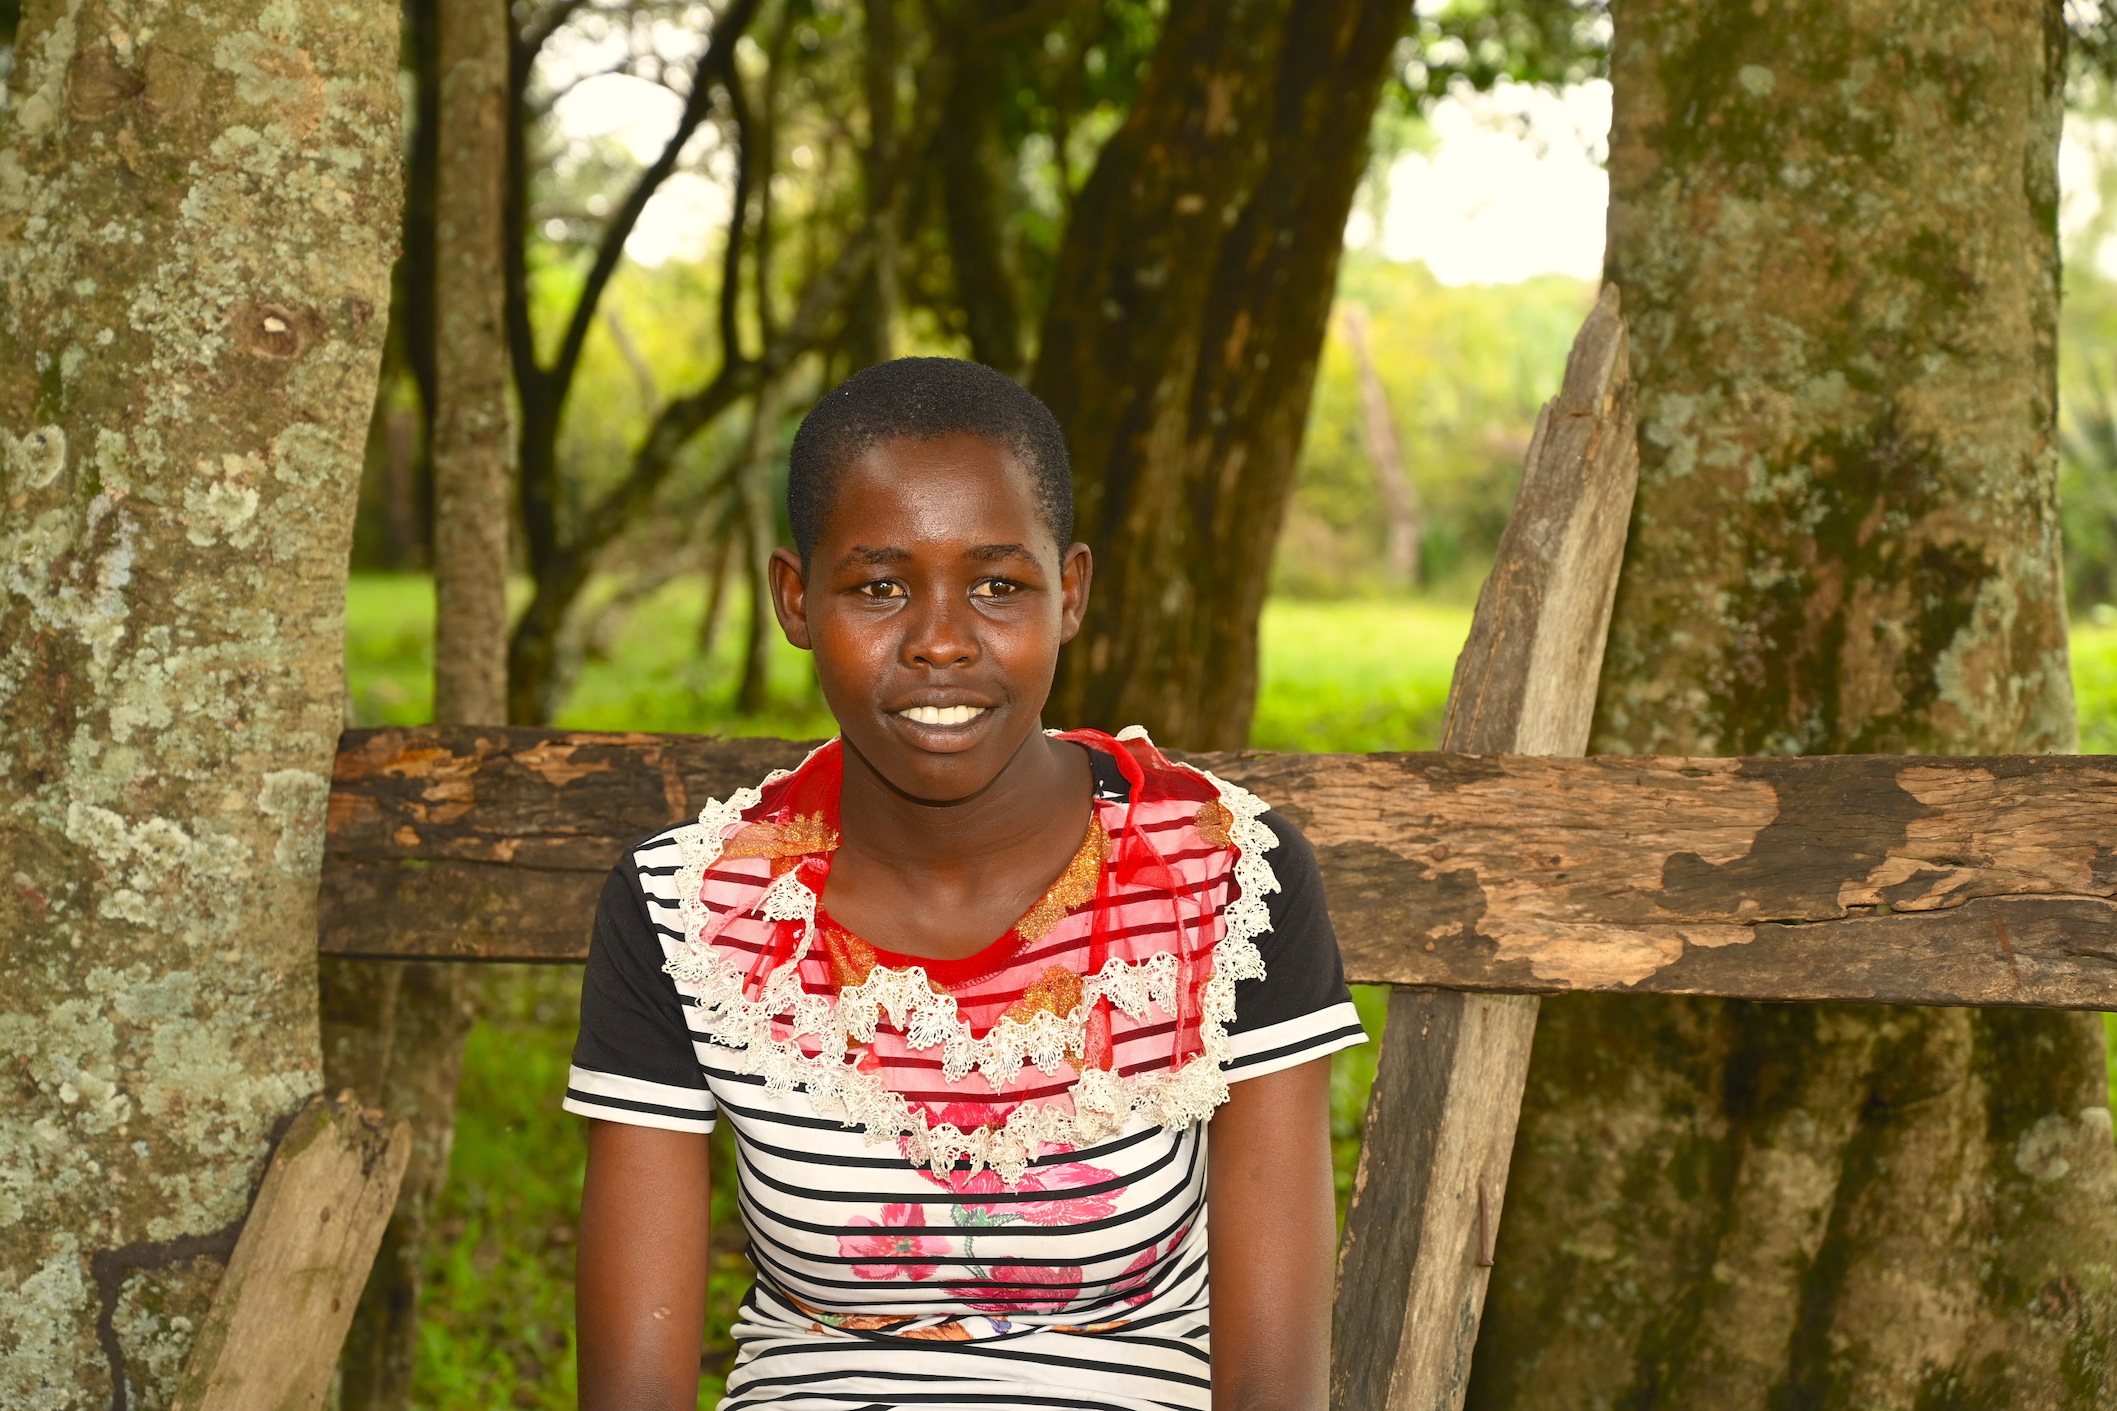 Leah is empowered to fight against FGM and other forms of child abuse.